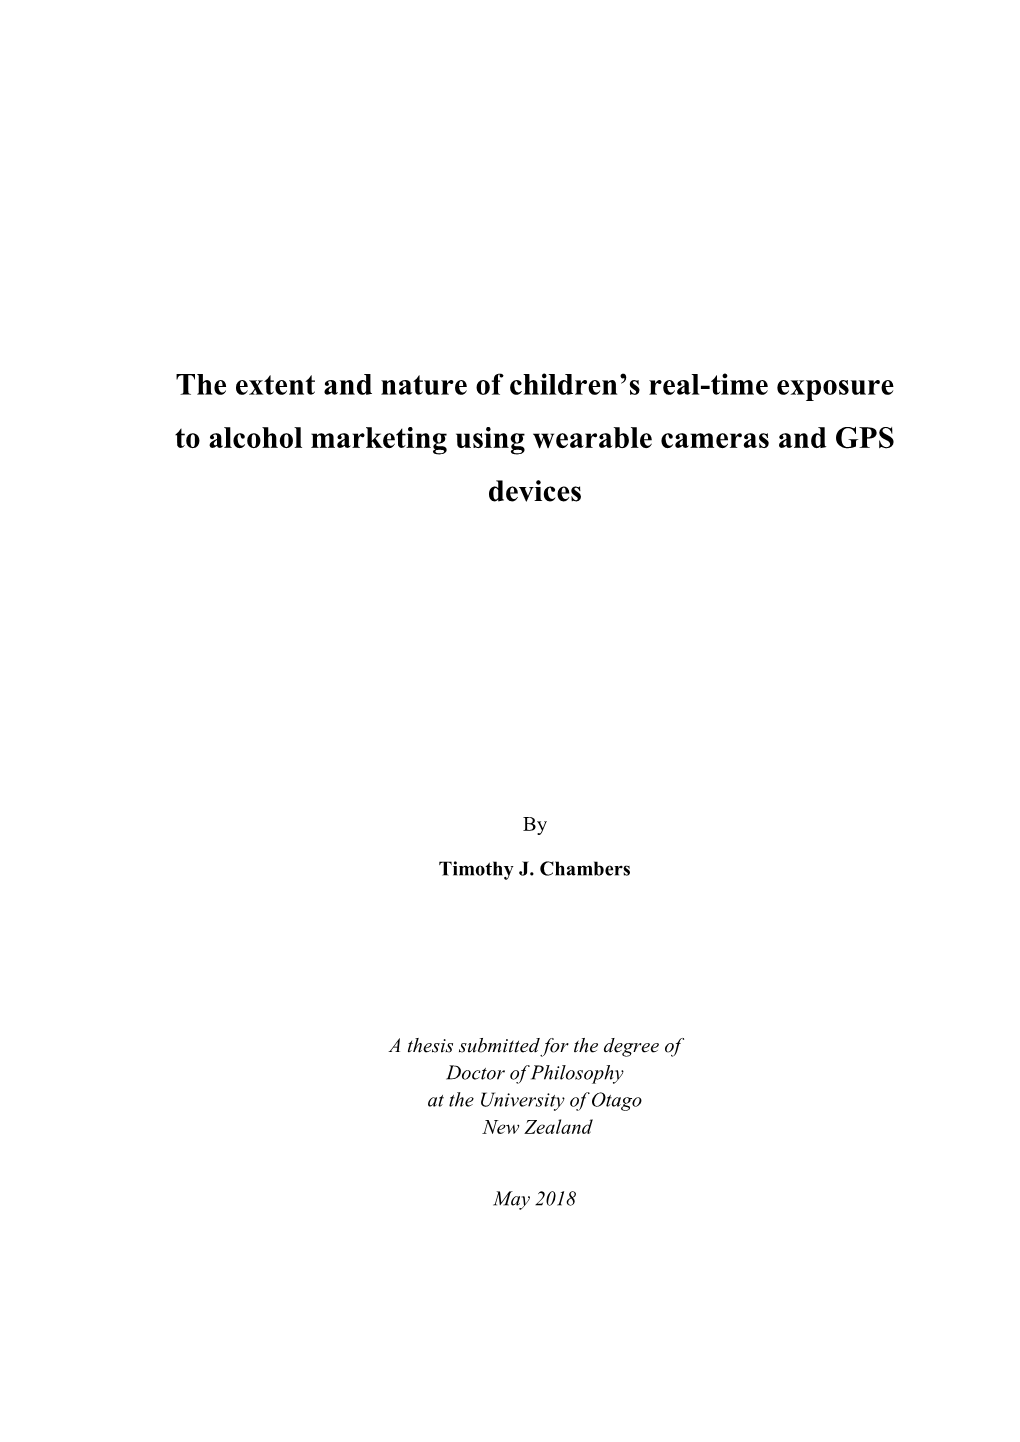 The Extent and Nature of Children's Real-Time Exposure To